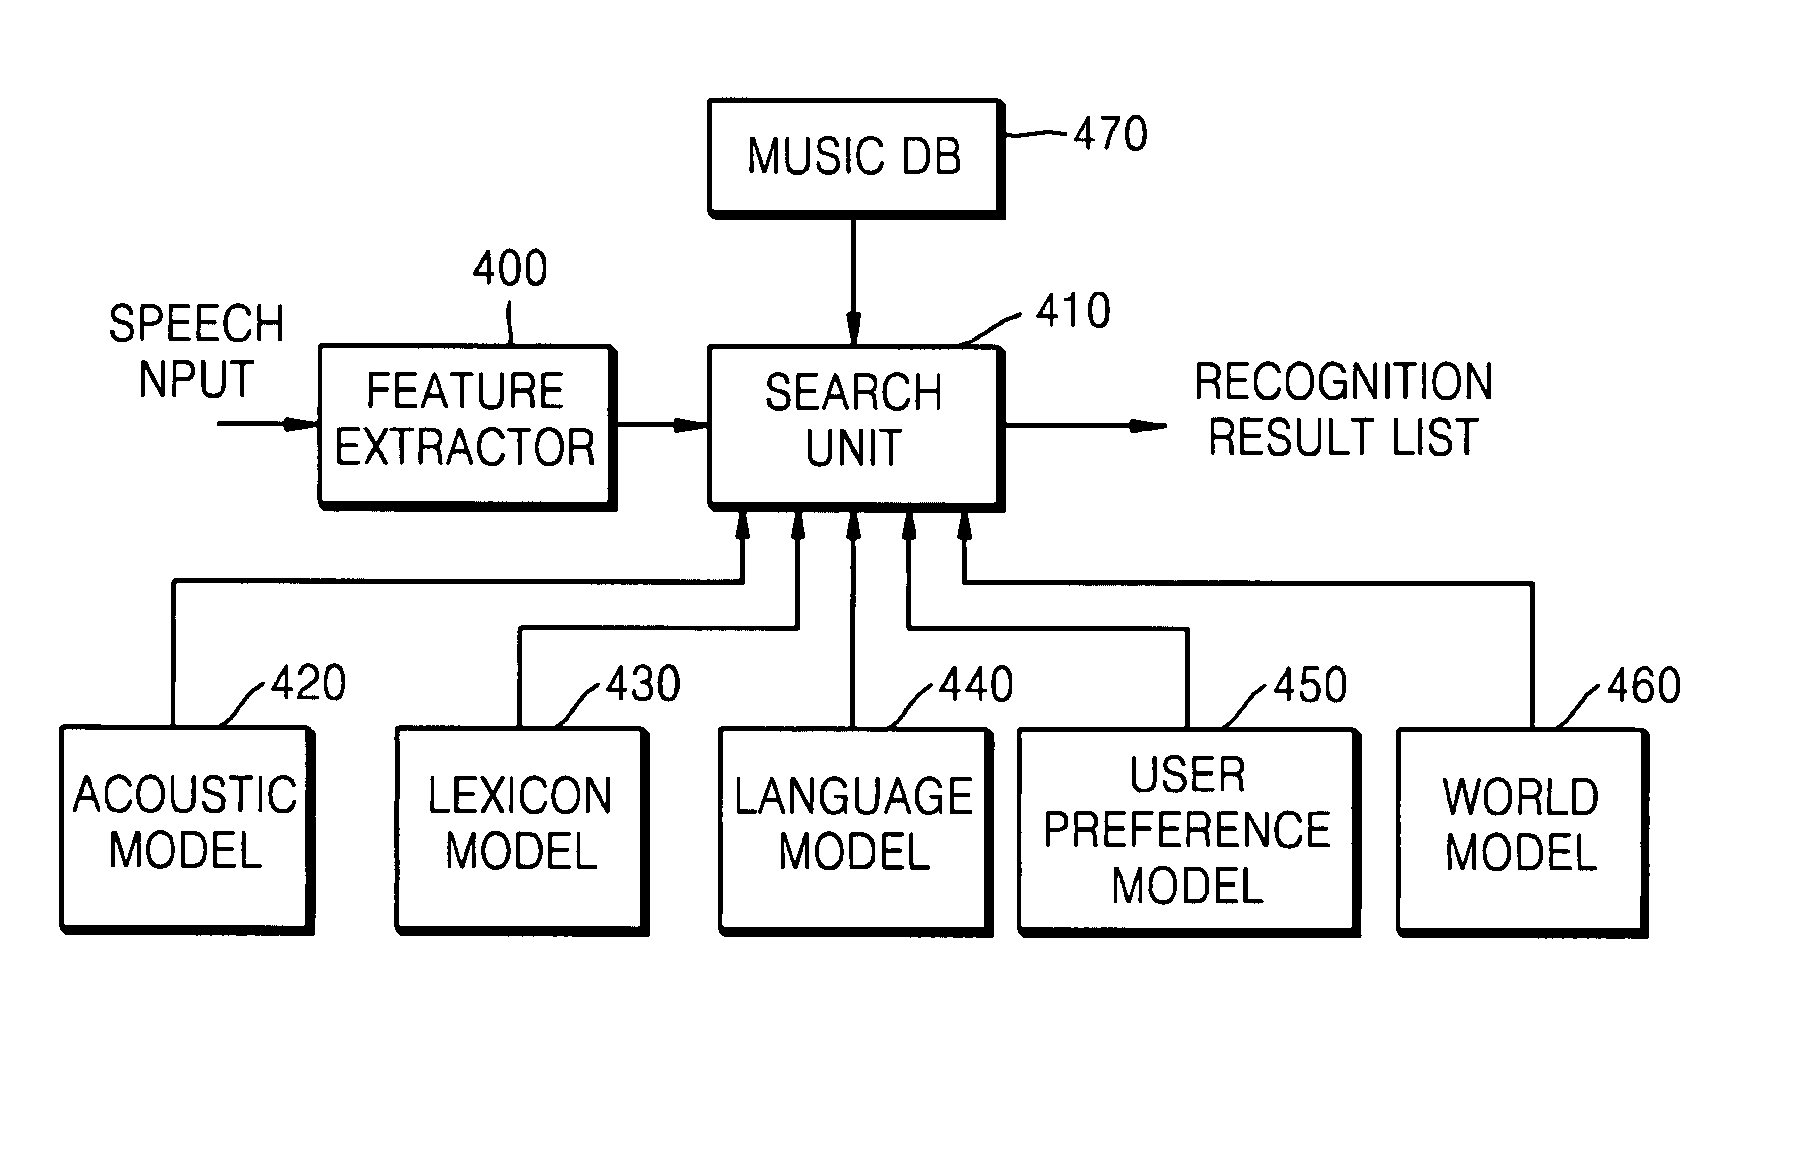 Method and apparatus for searching for music based on speech recognition